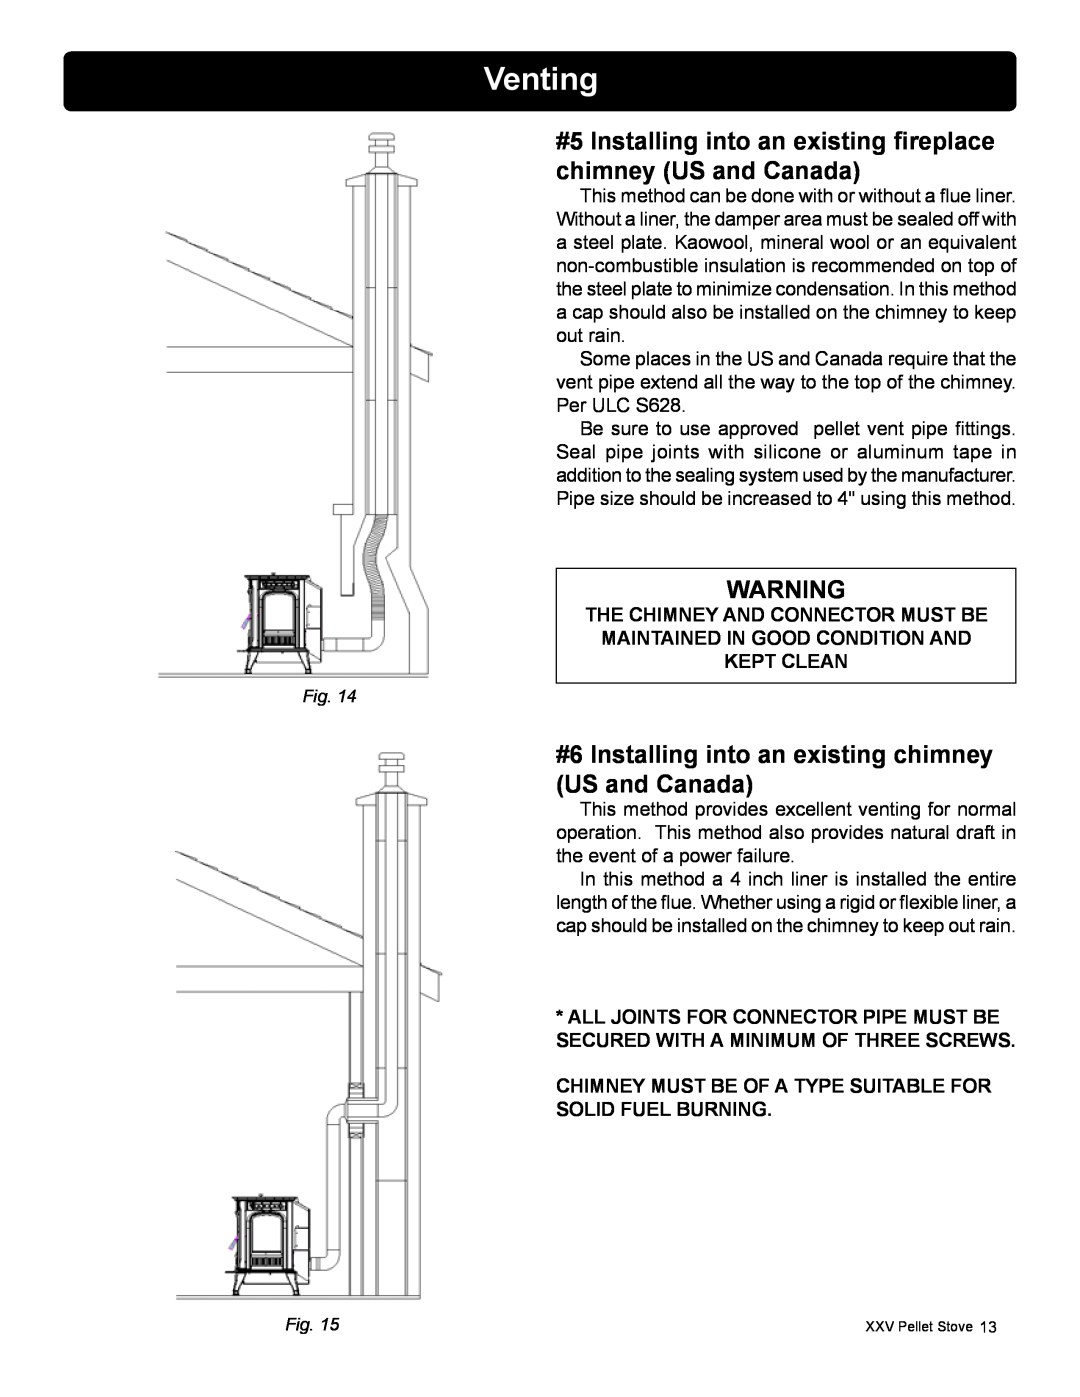 Harman Stove Company R16 manual Venting, The Chimney and Connector Must be, Maintained in Good Condition and Kept Clean 